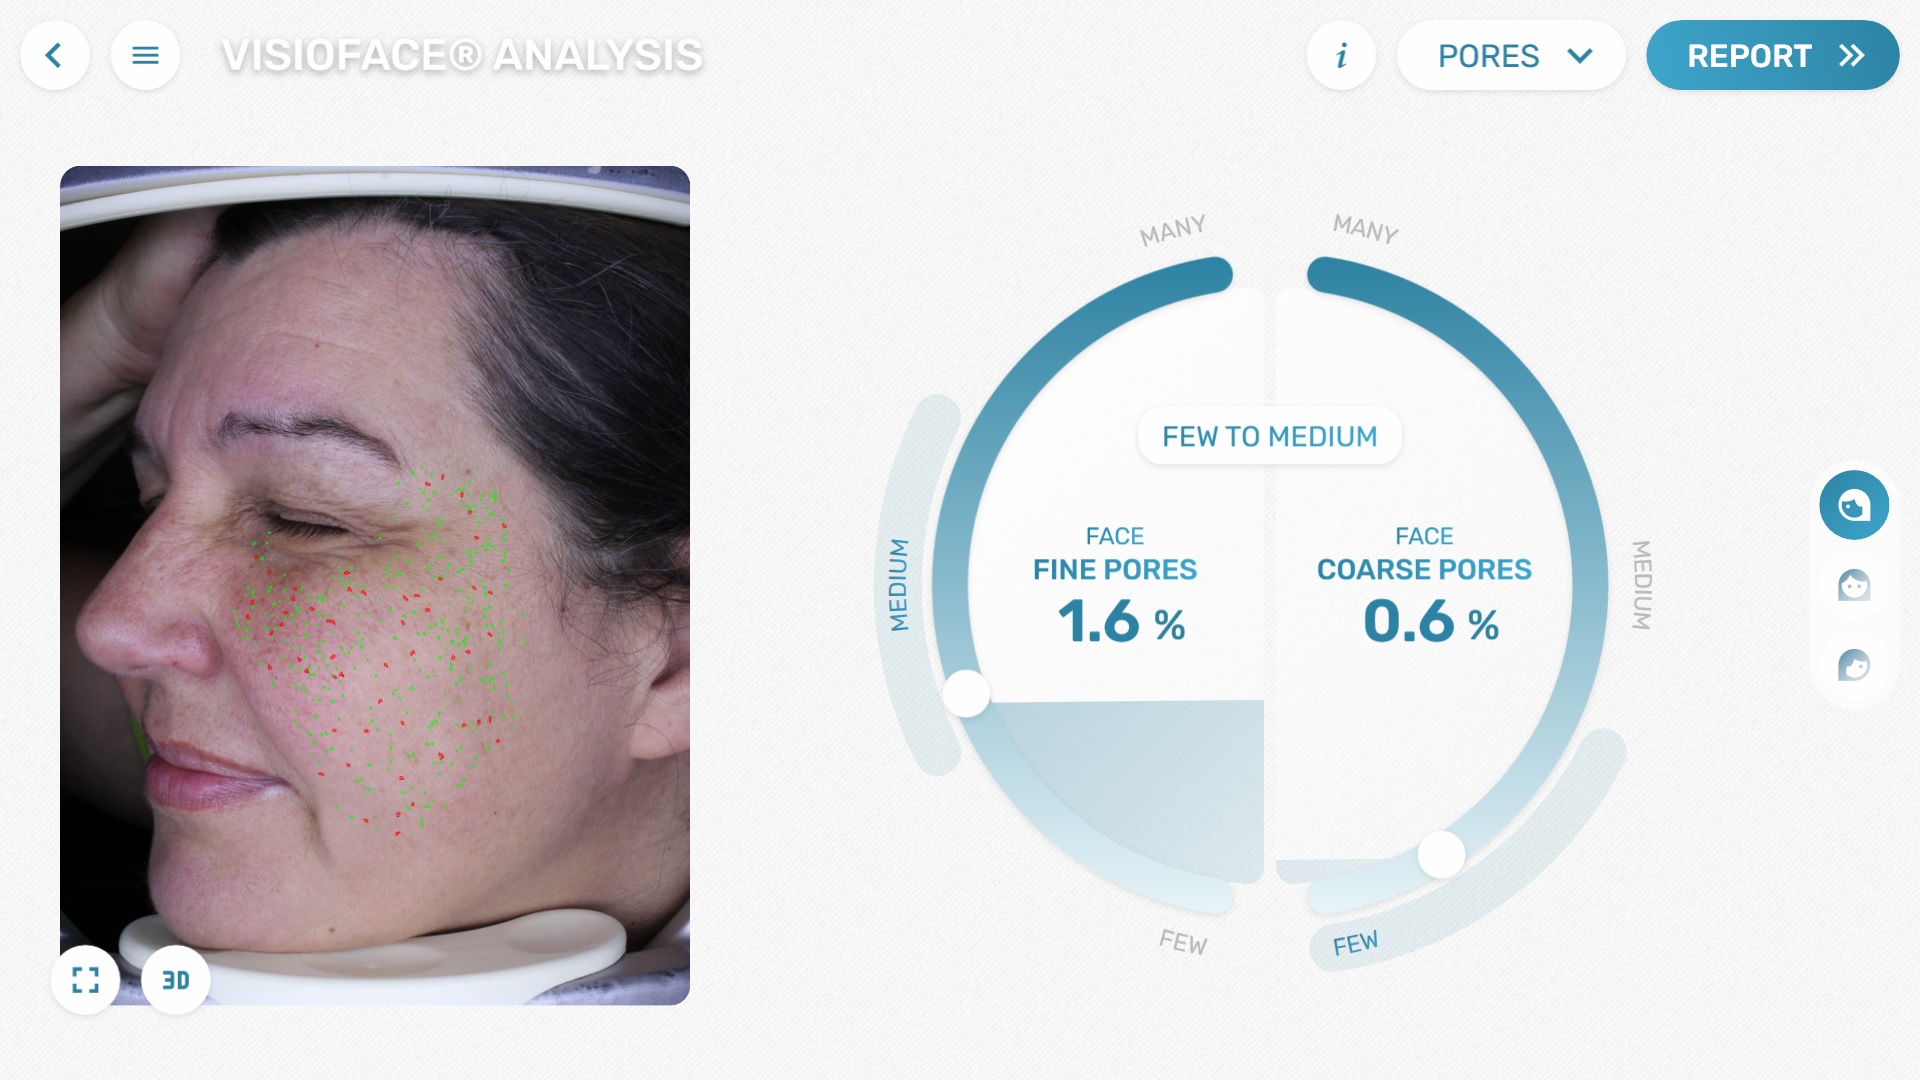 VisioFace® - see fine and coarse pores in the image